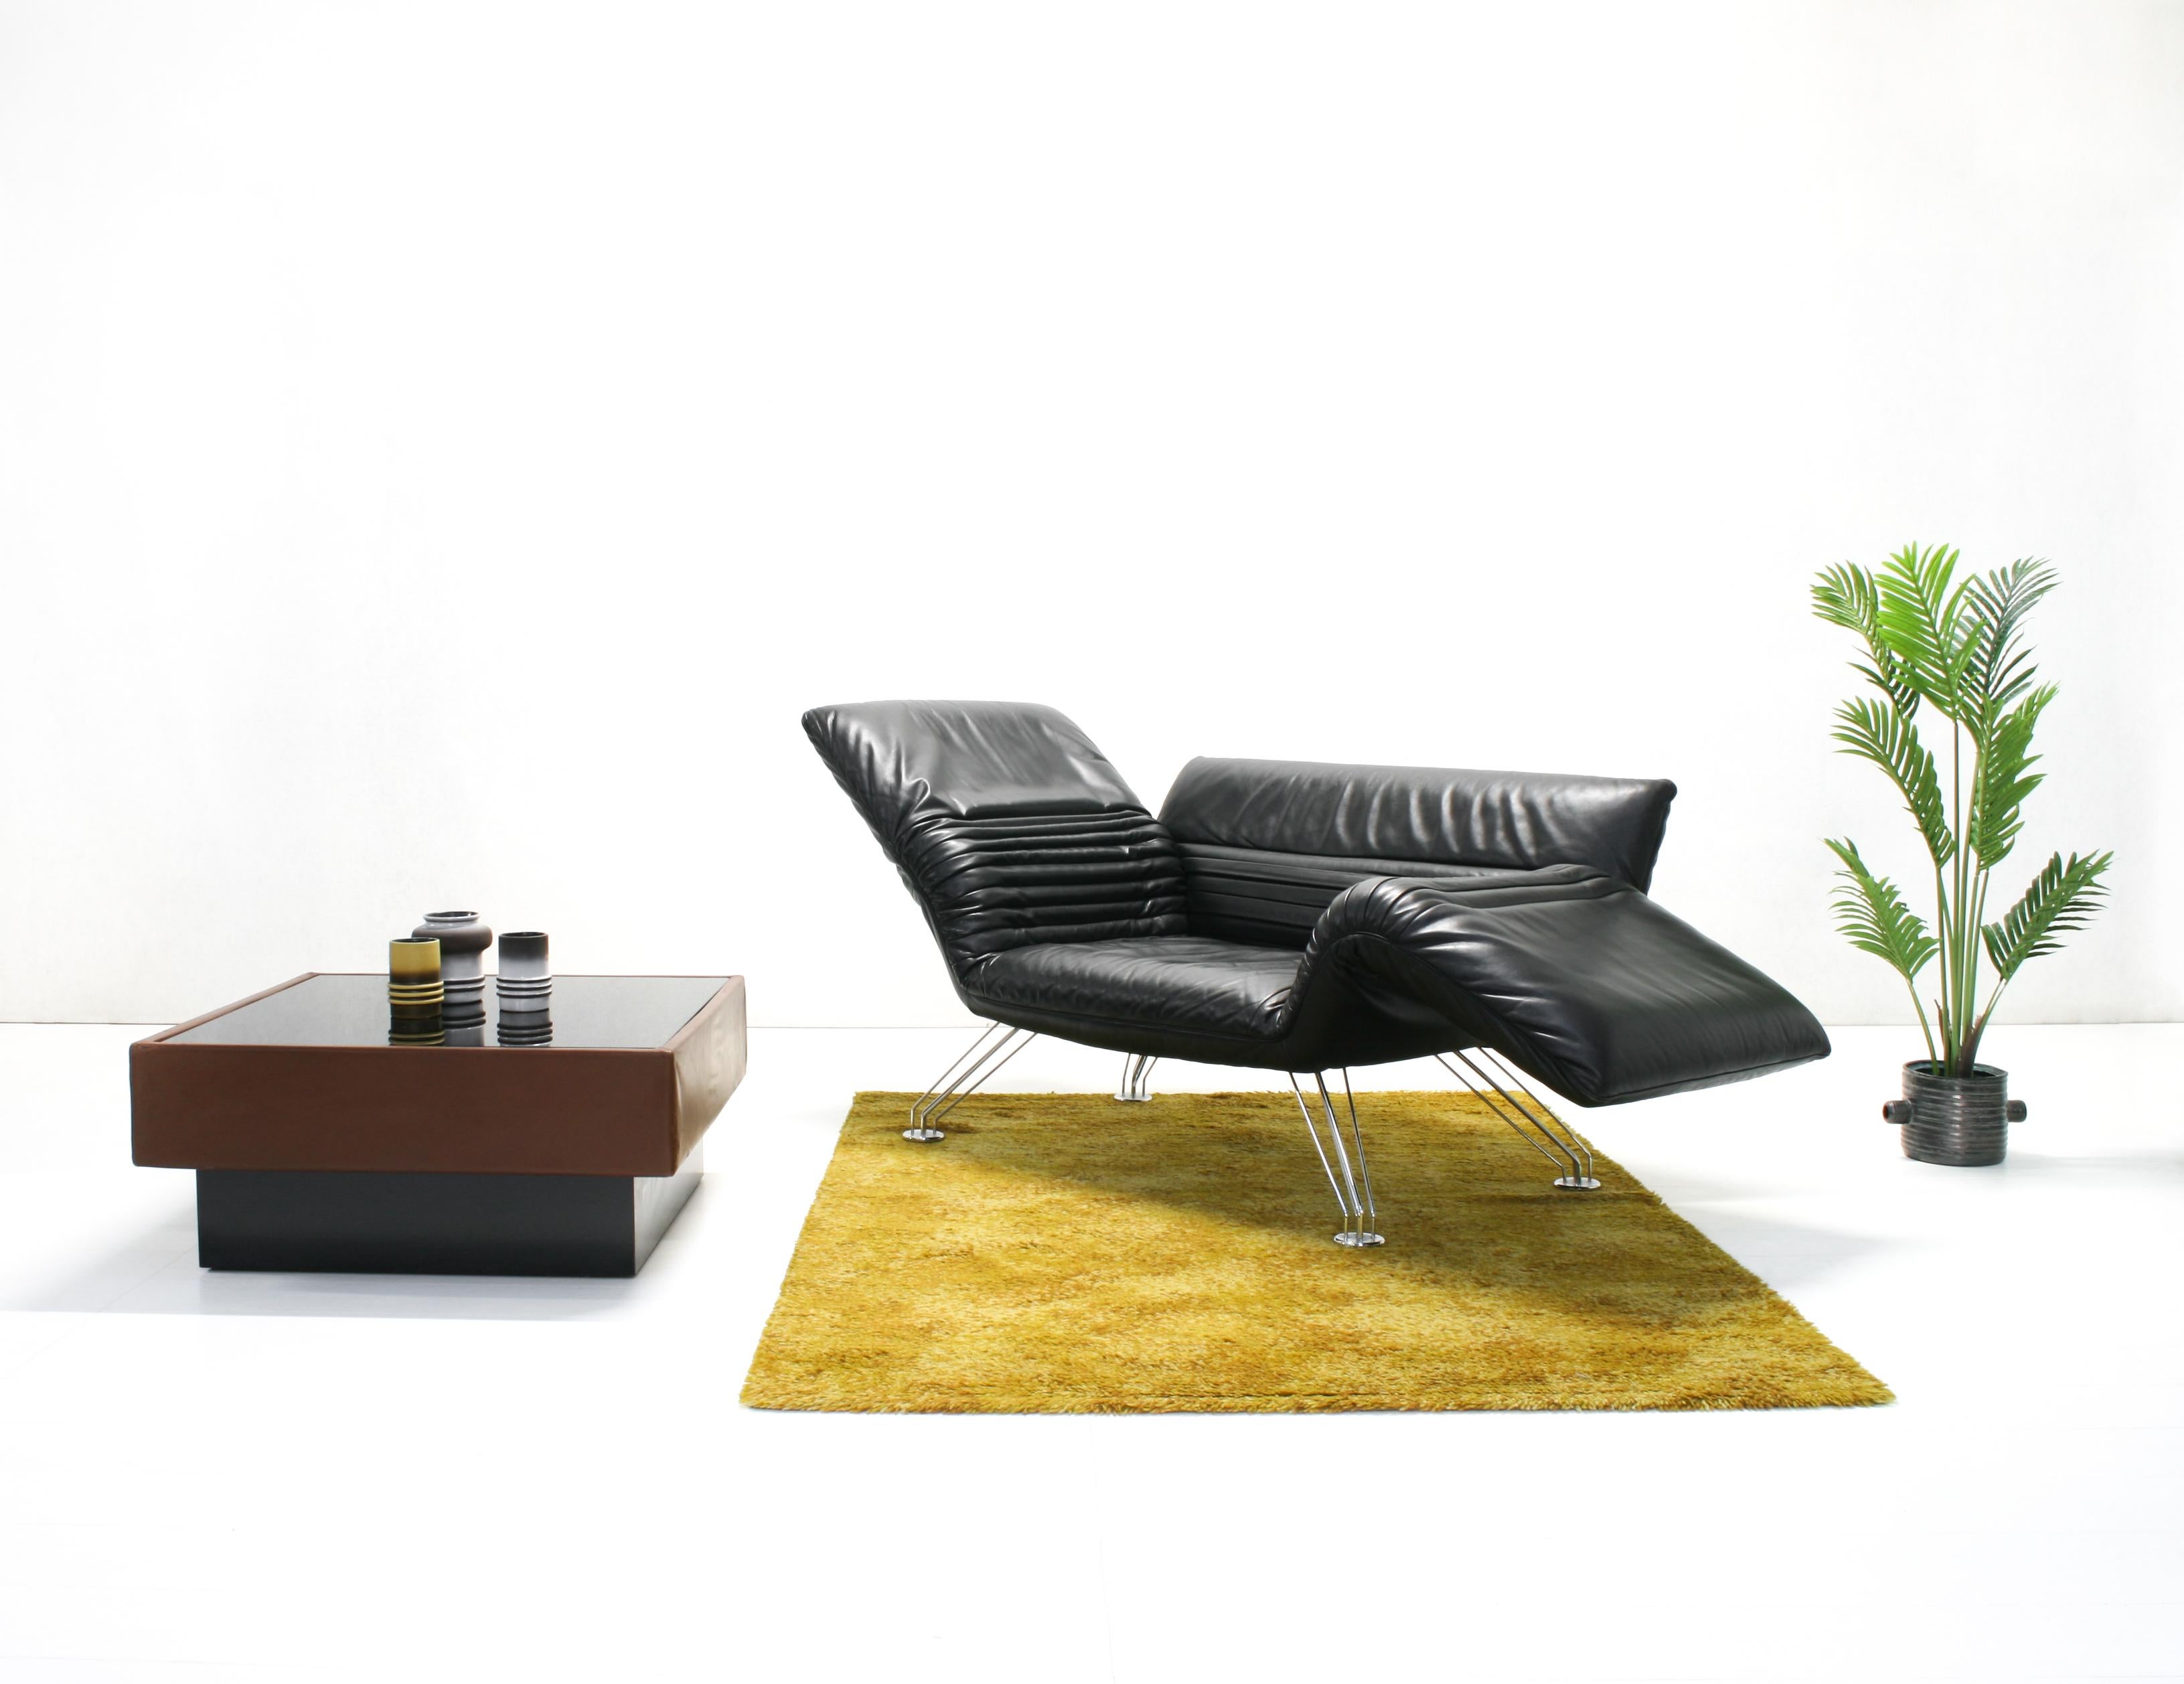 The De Sede DS 142 lounge armchair was designed by Winfried Totzek in 1988 for de Sede. It features fully adjustable armrests and backrest with manually ratchet joints, black leather high quality upholstery, legs finished in chrome.

DS-142 is an